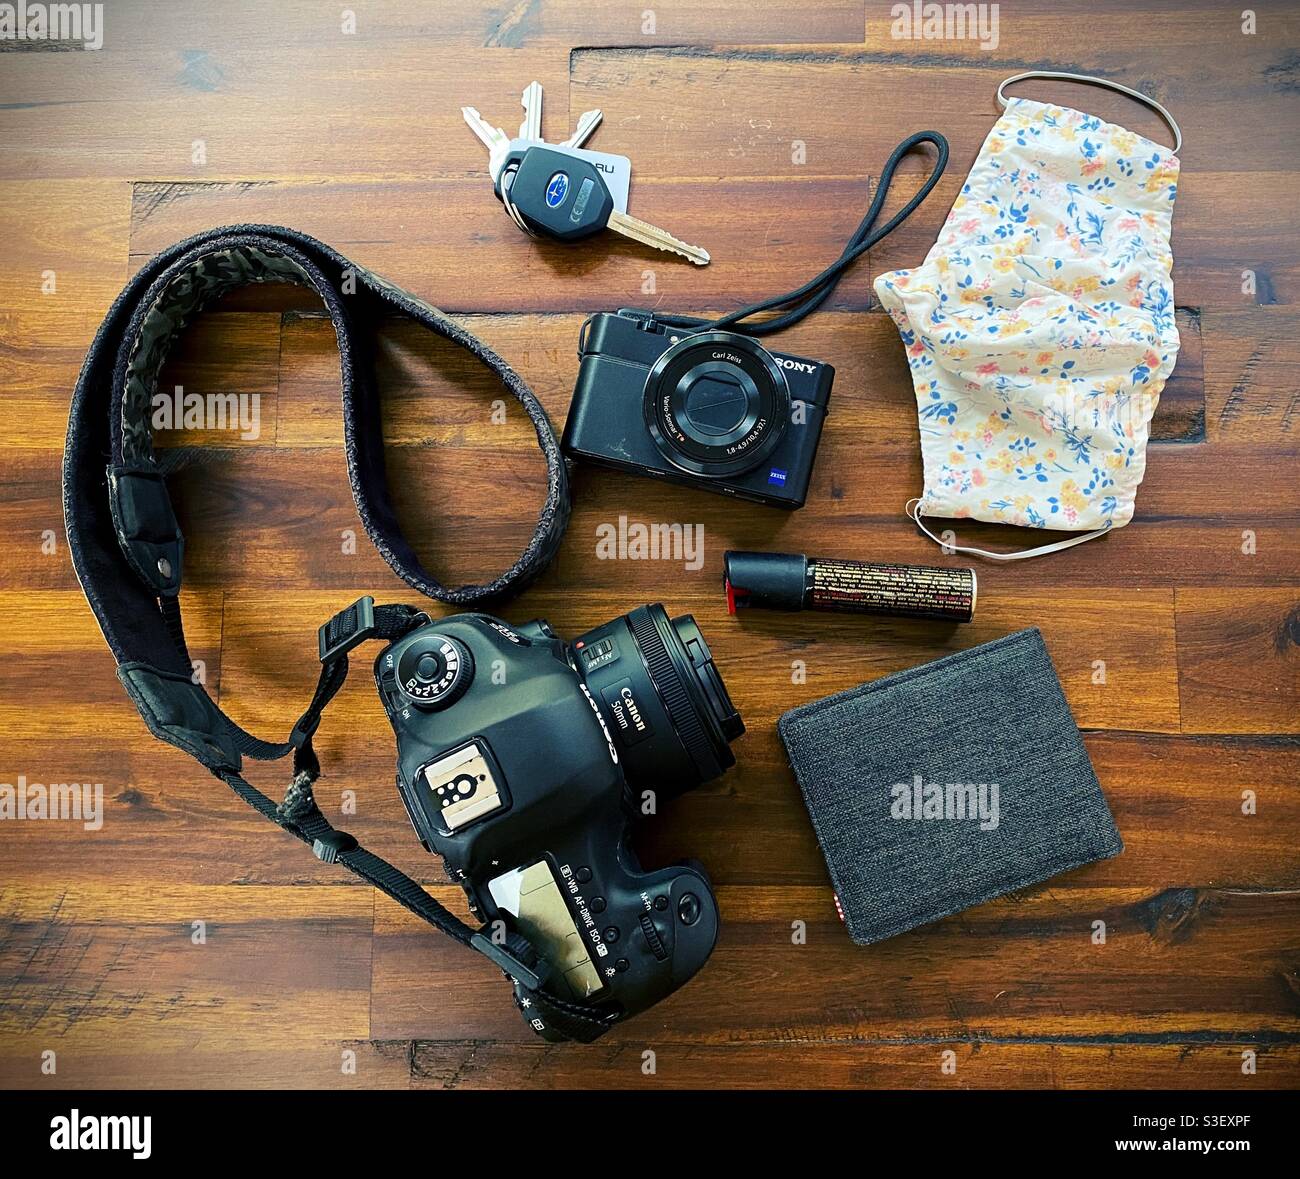 Top down view of a street photogrspher's gear, including two kinds of cameras, keys, face mask, wallet, and pepper spray. Stock Photo